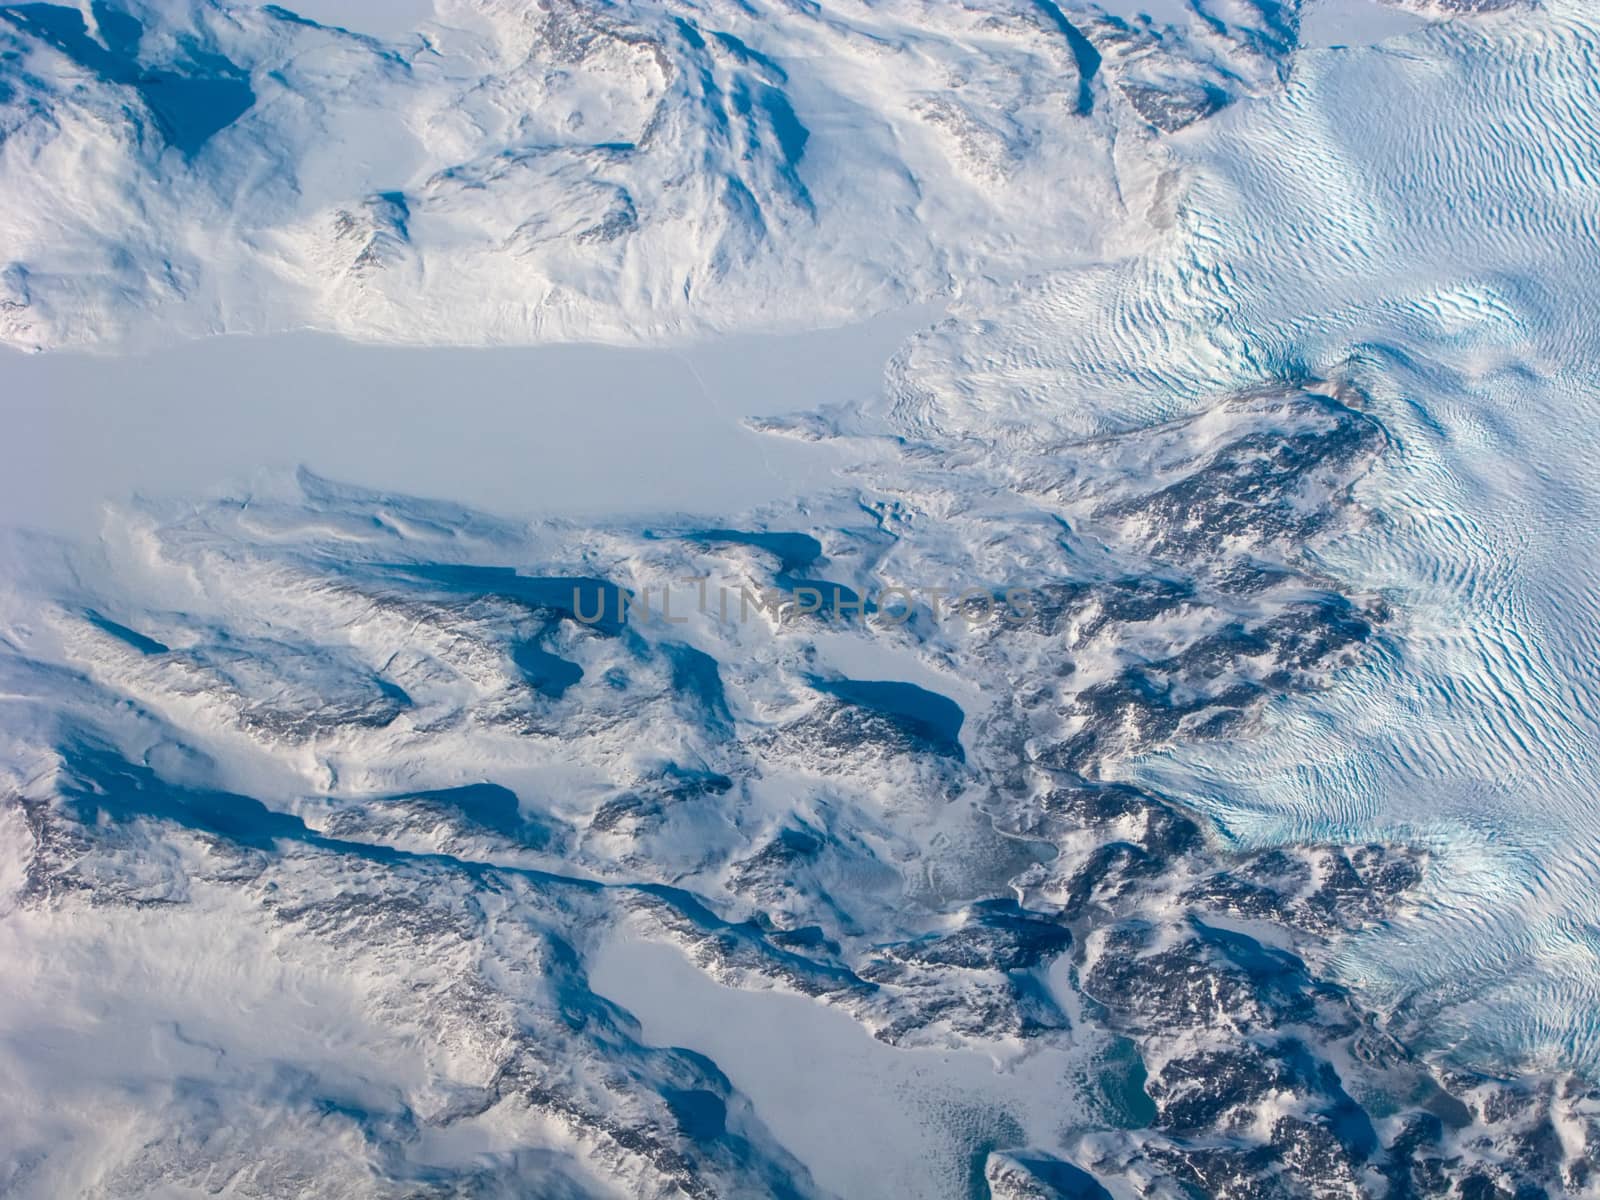 Aerial view of the Greenland with mountain, snow river and waves